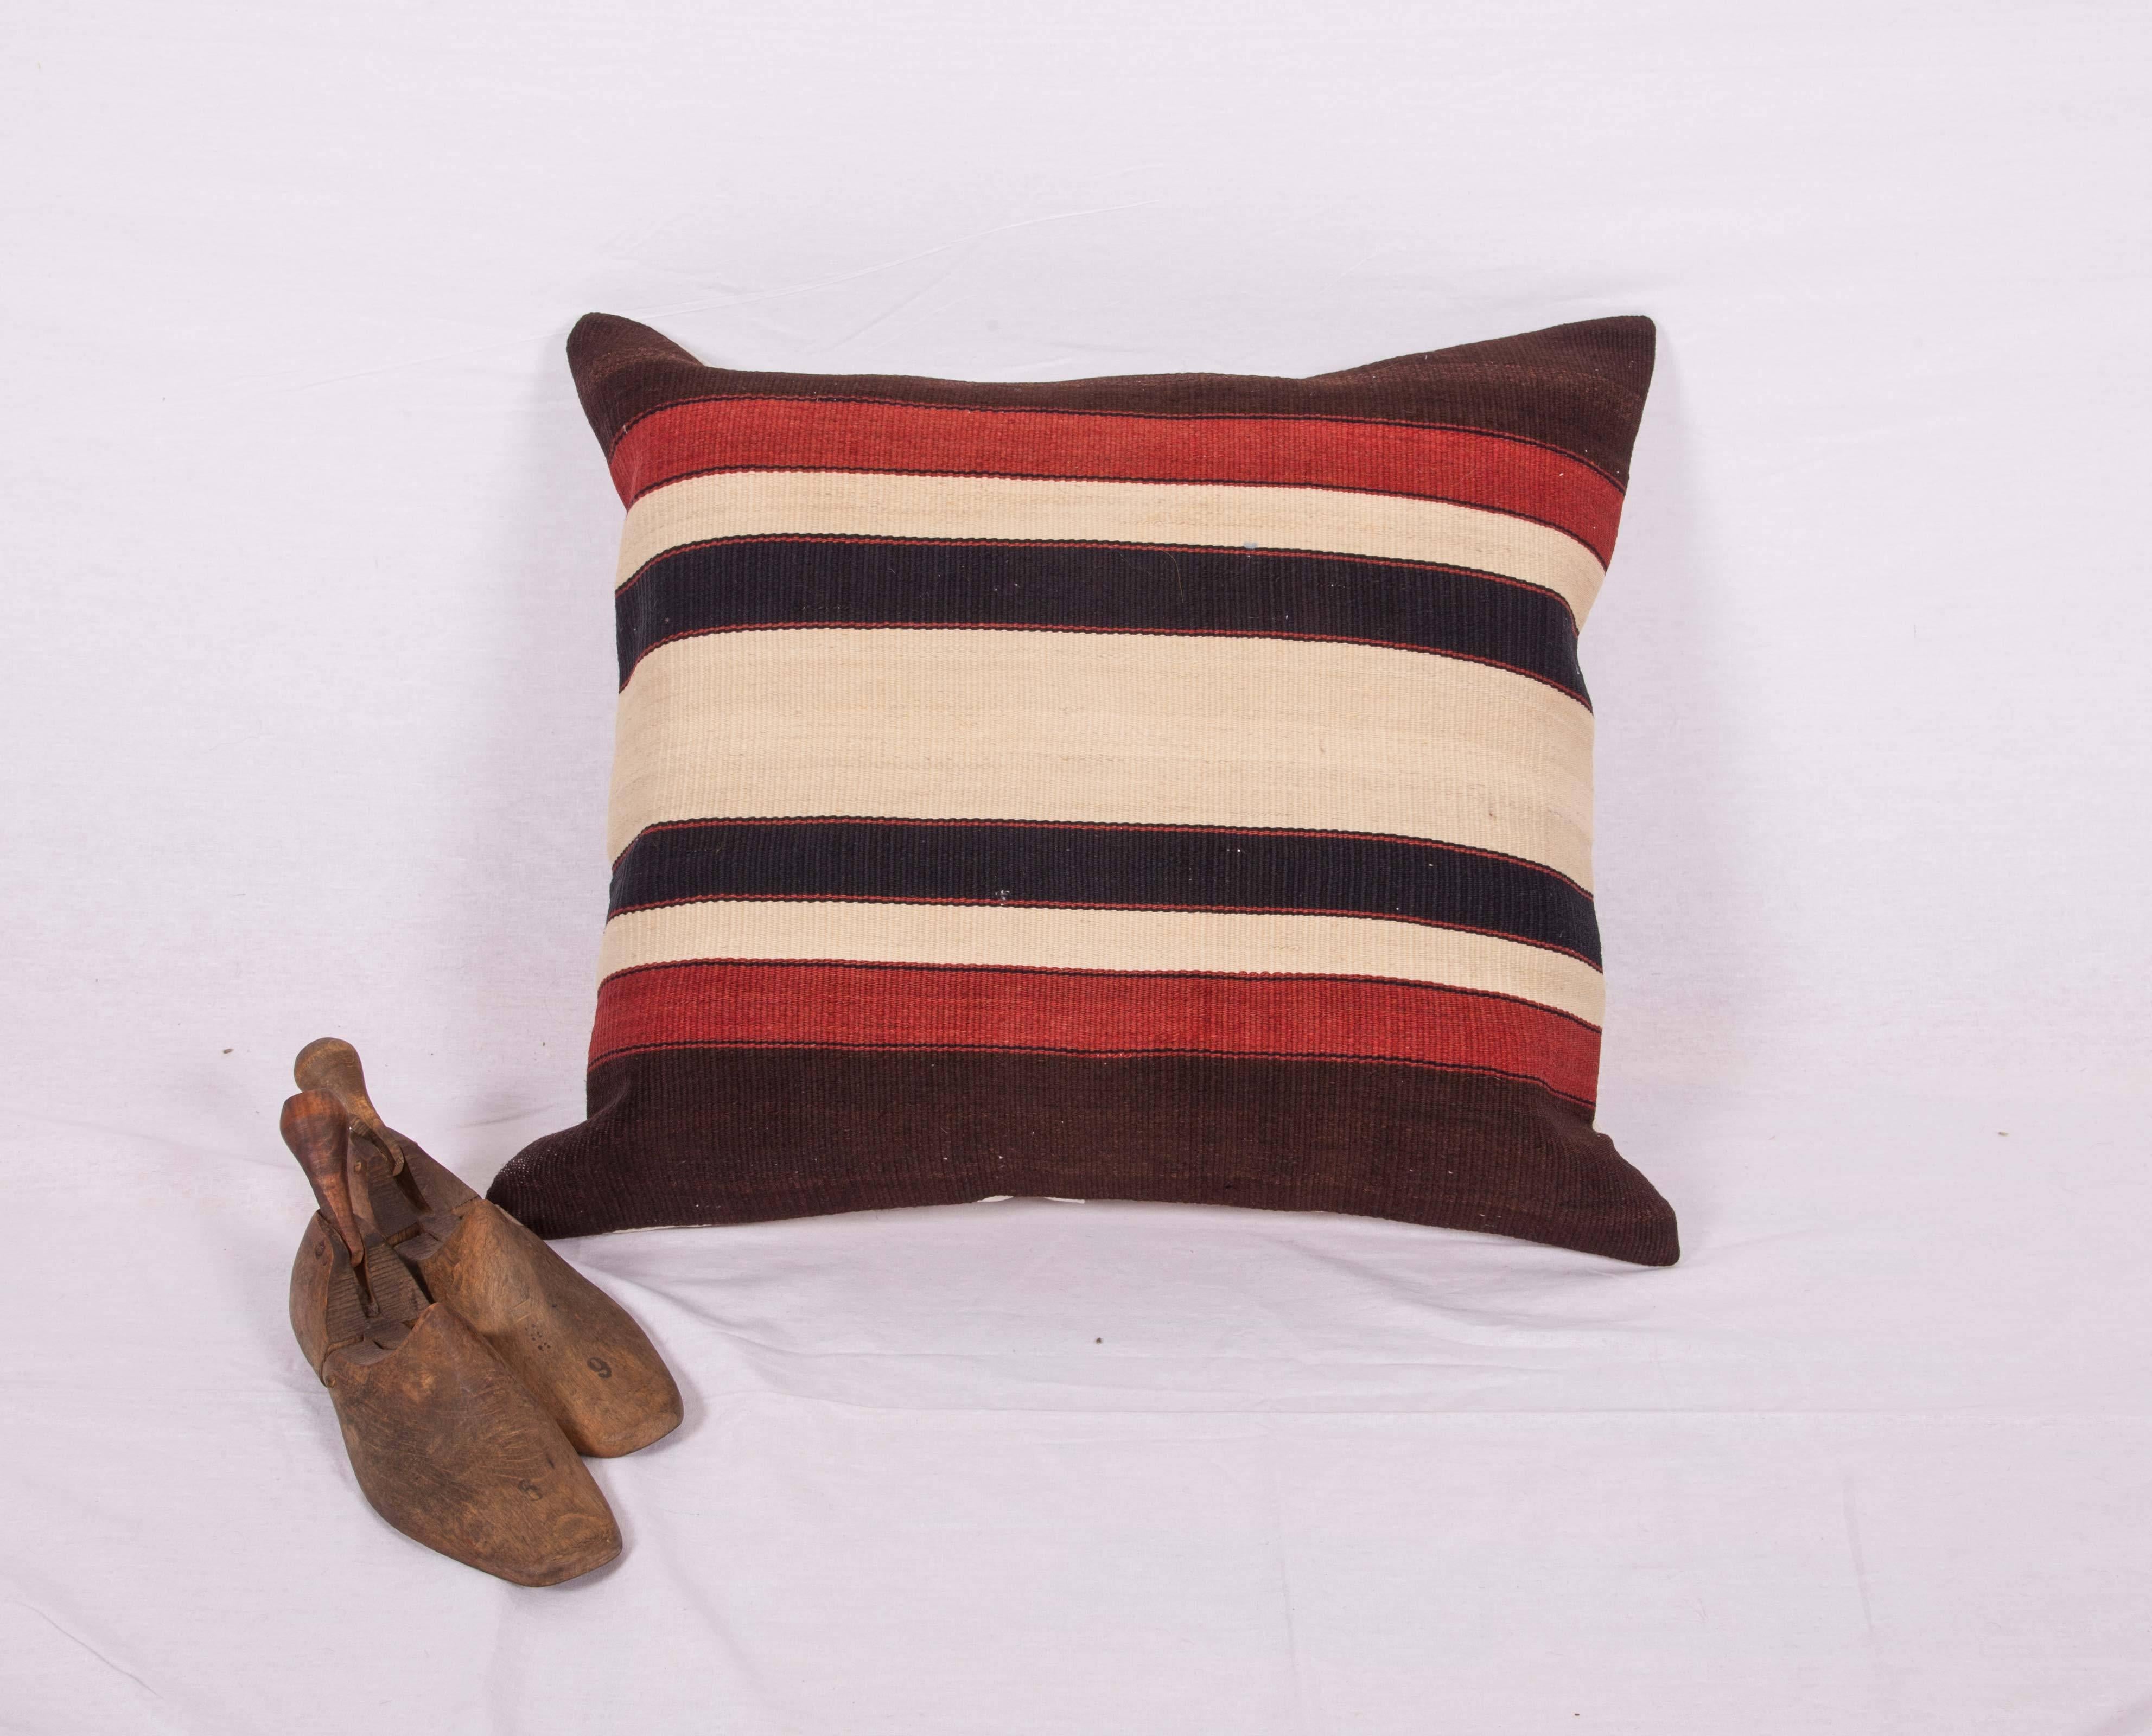 The pillow case is made from an antique Anatolian kilim. It does not come with an insert but comes with a bag made to the size and out of cotton to accommodate the filling. The backing is made of linen. Please note filling is not provided. Since the